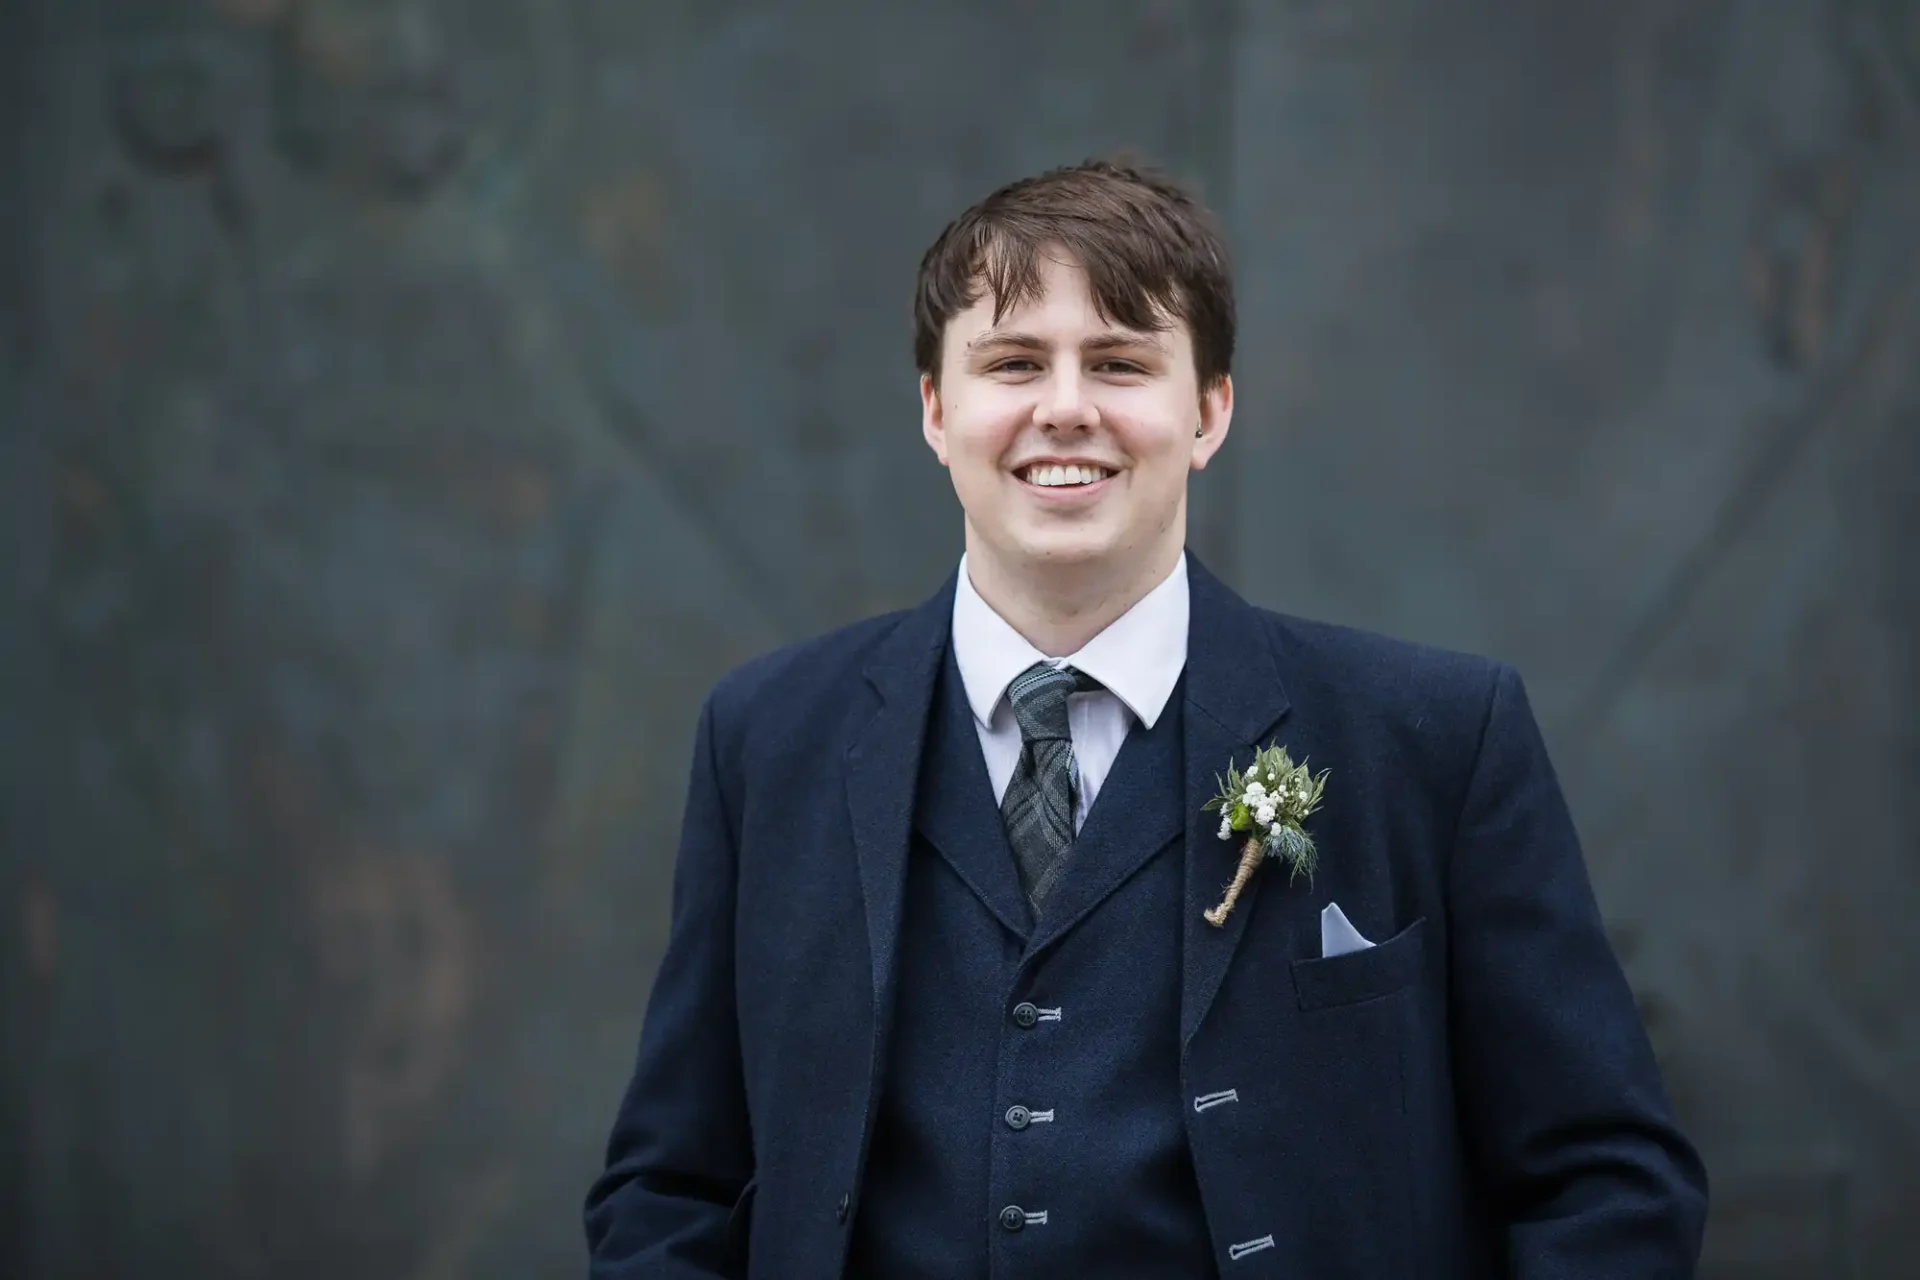 A smiling groom in a dark blue suit with a boutonniere, standing in front of a muted, textured backdrop.